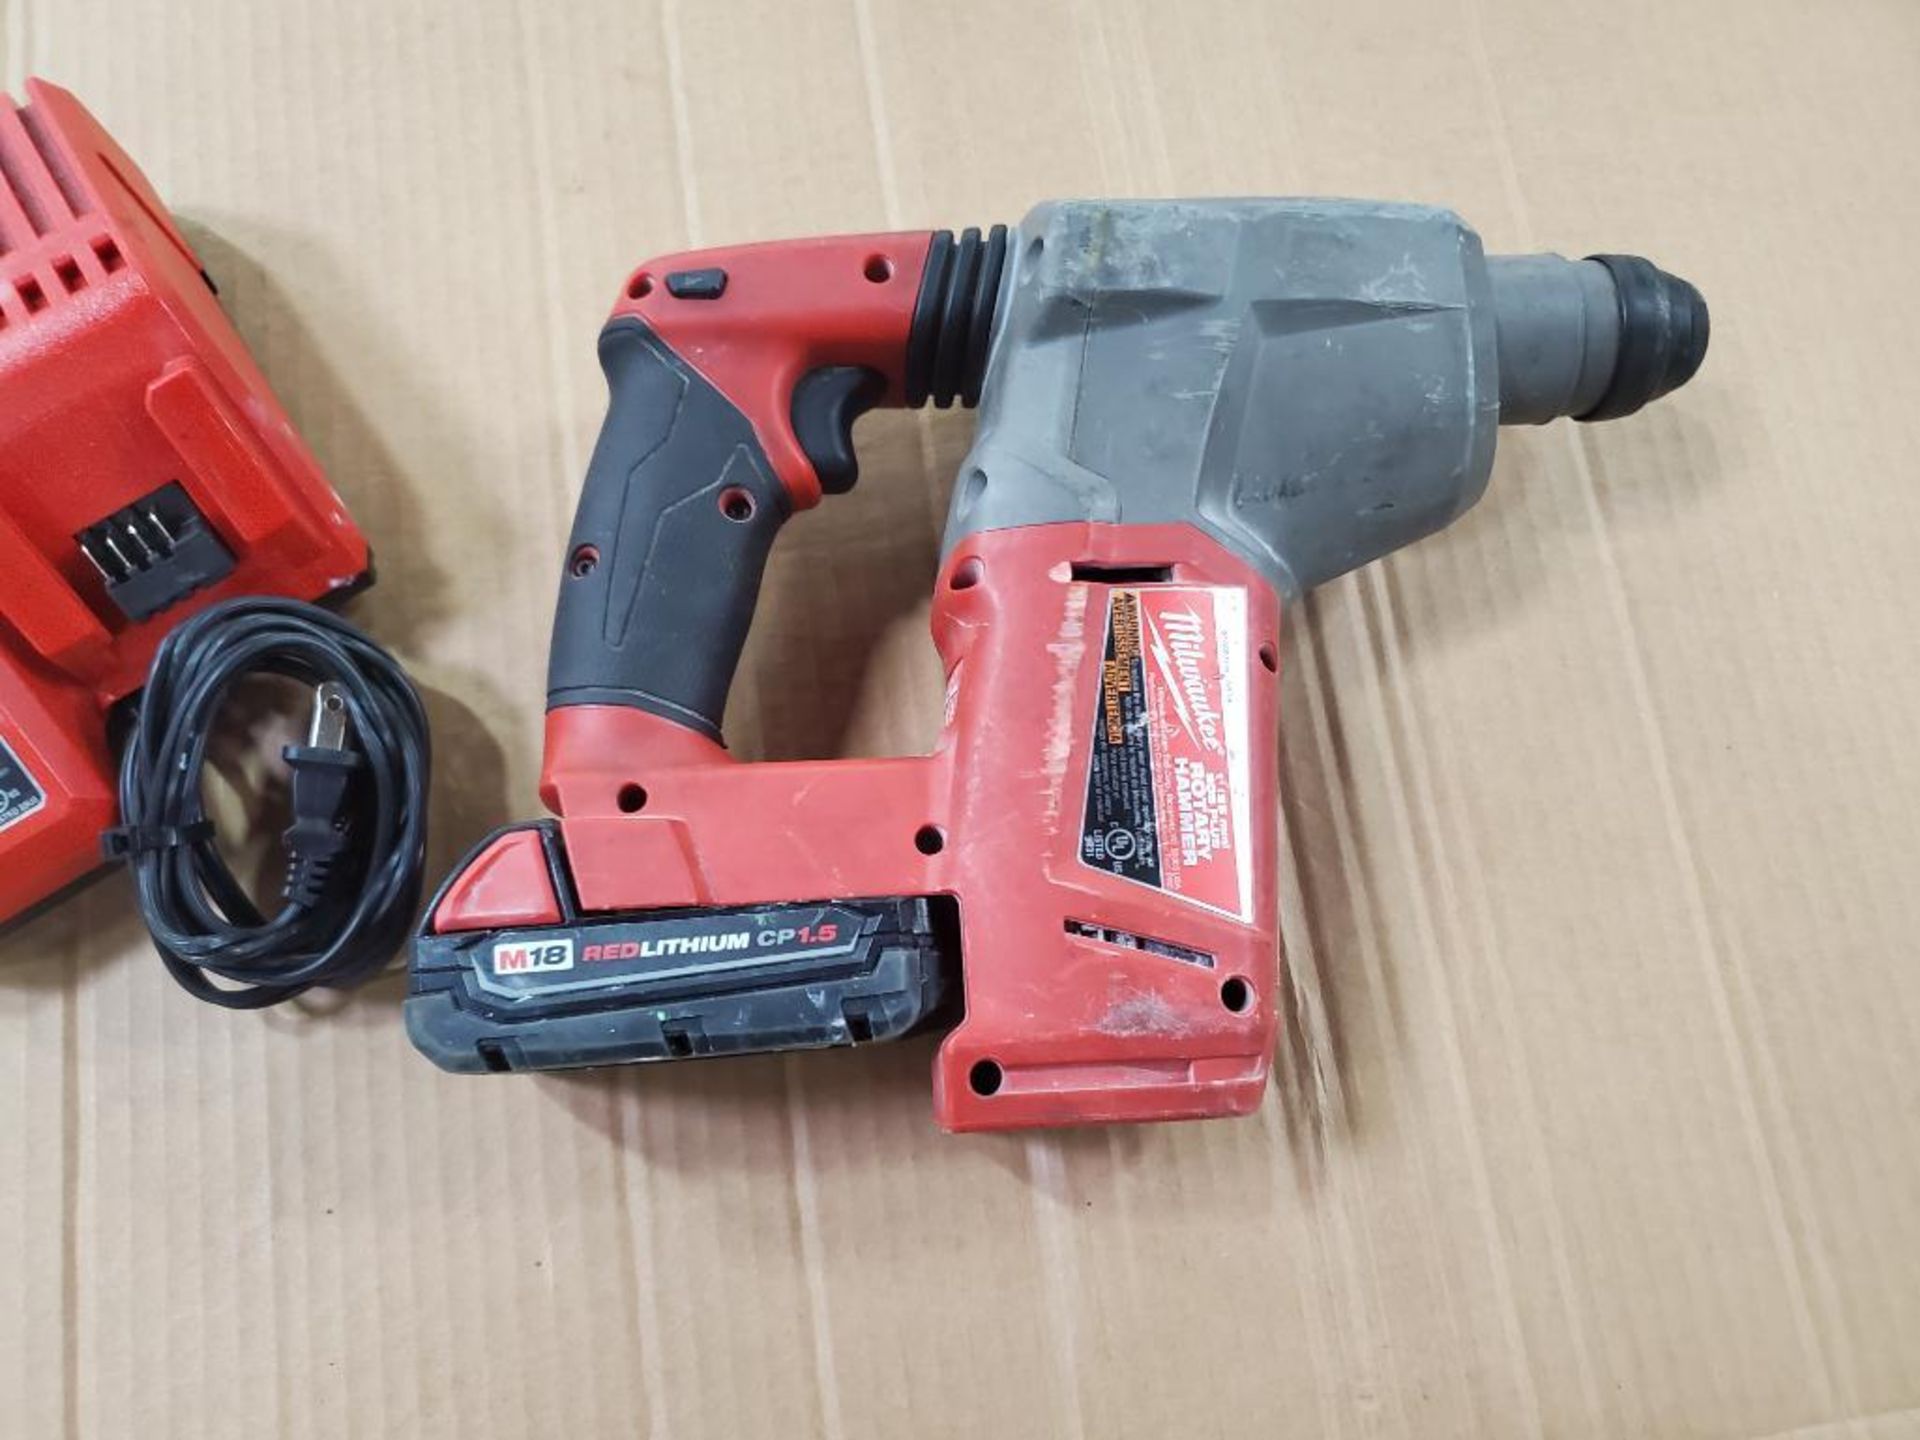 MILWAUKEE 1'' ROTARY HAMMER DILL SDS PLUS, CAT# 2712-20, S/N G17AS1734-02069, 18-VOLT, WITH BATTERY - Image 2 of 3